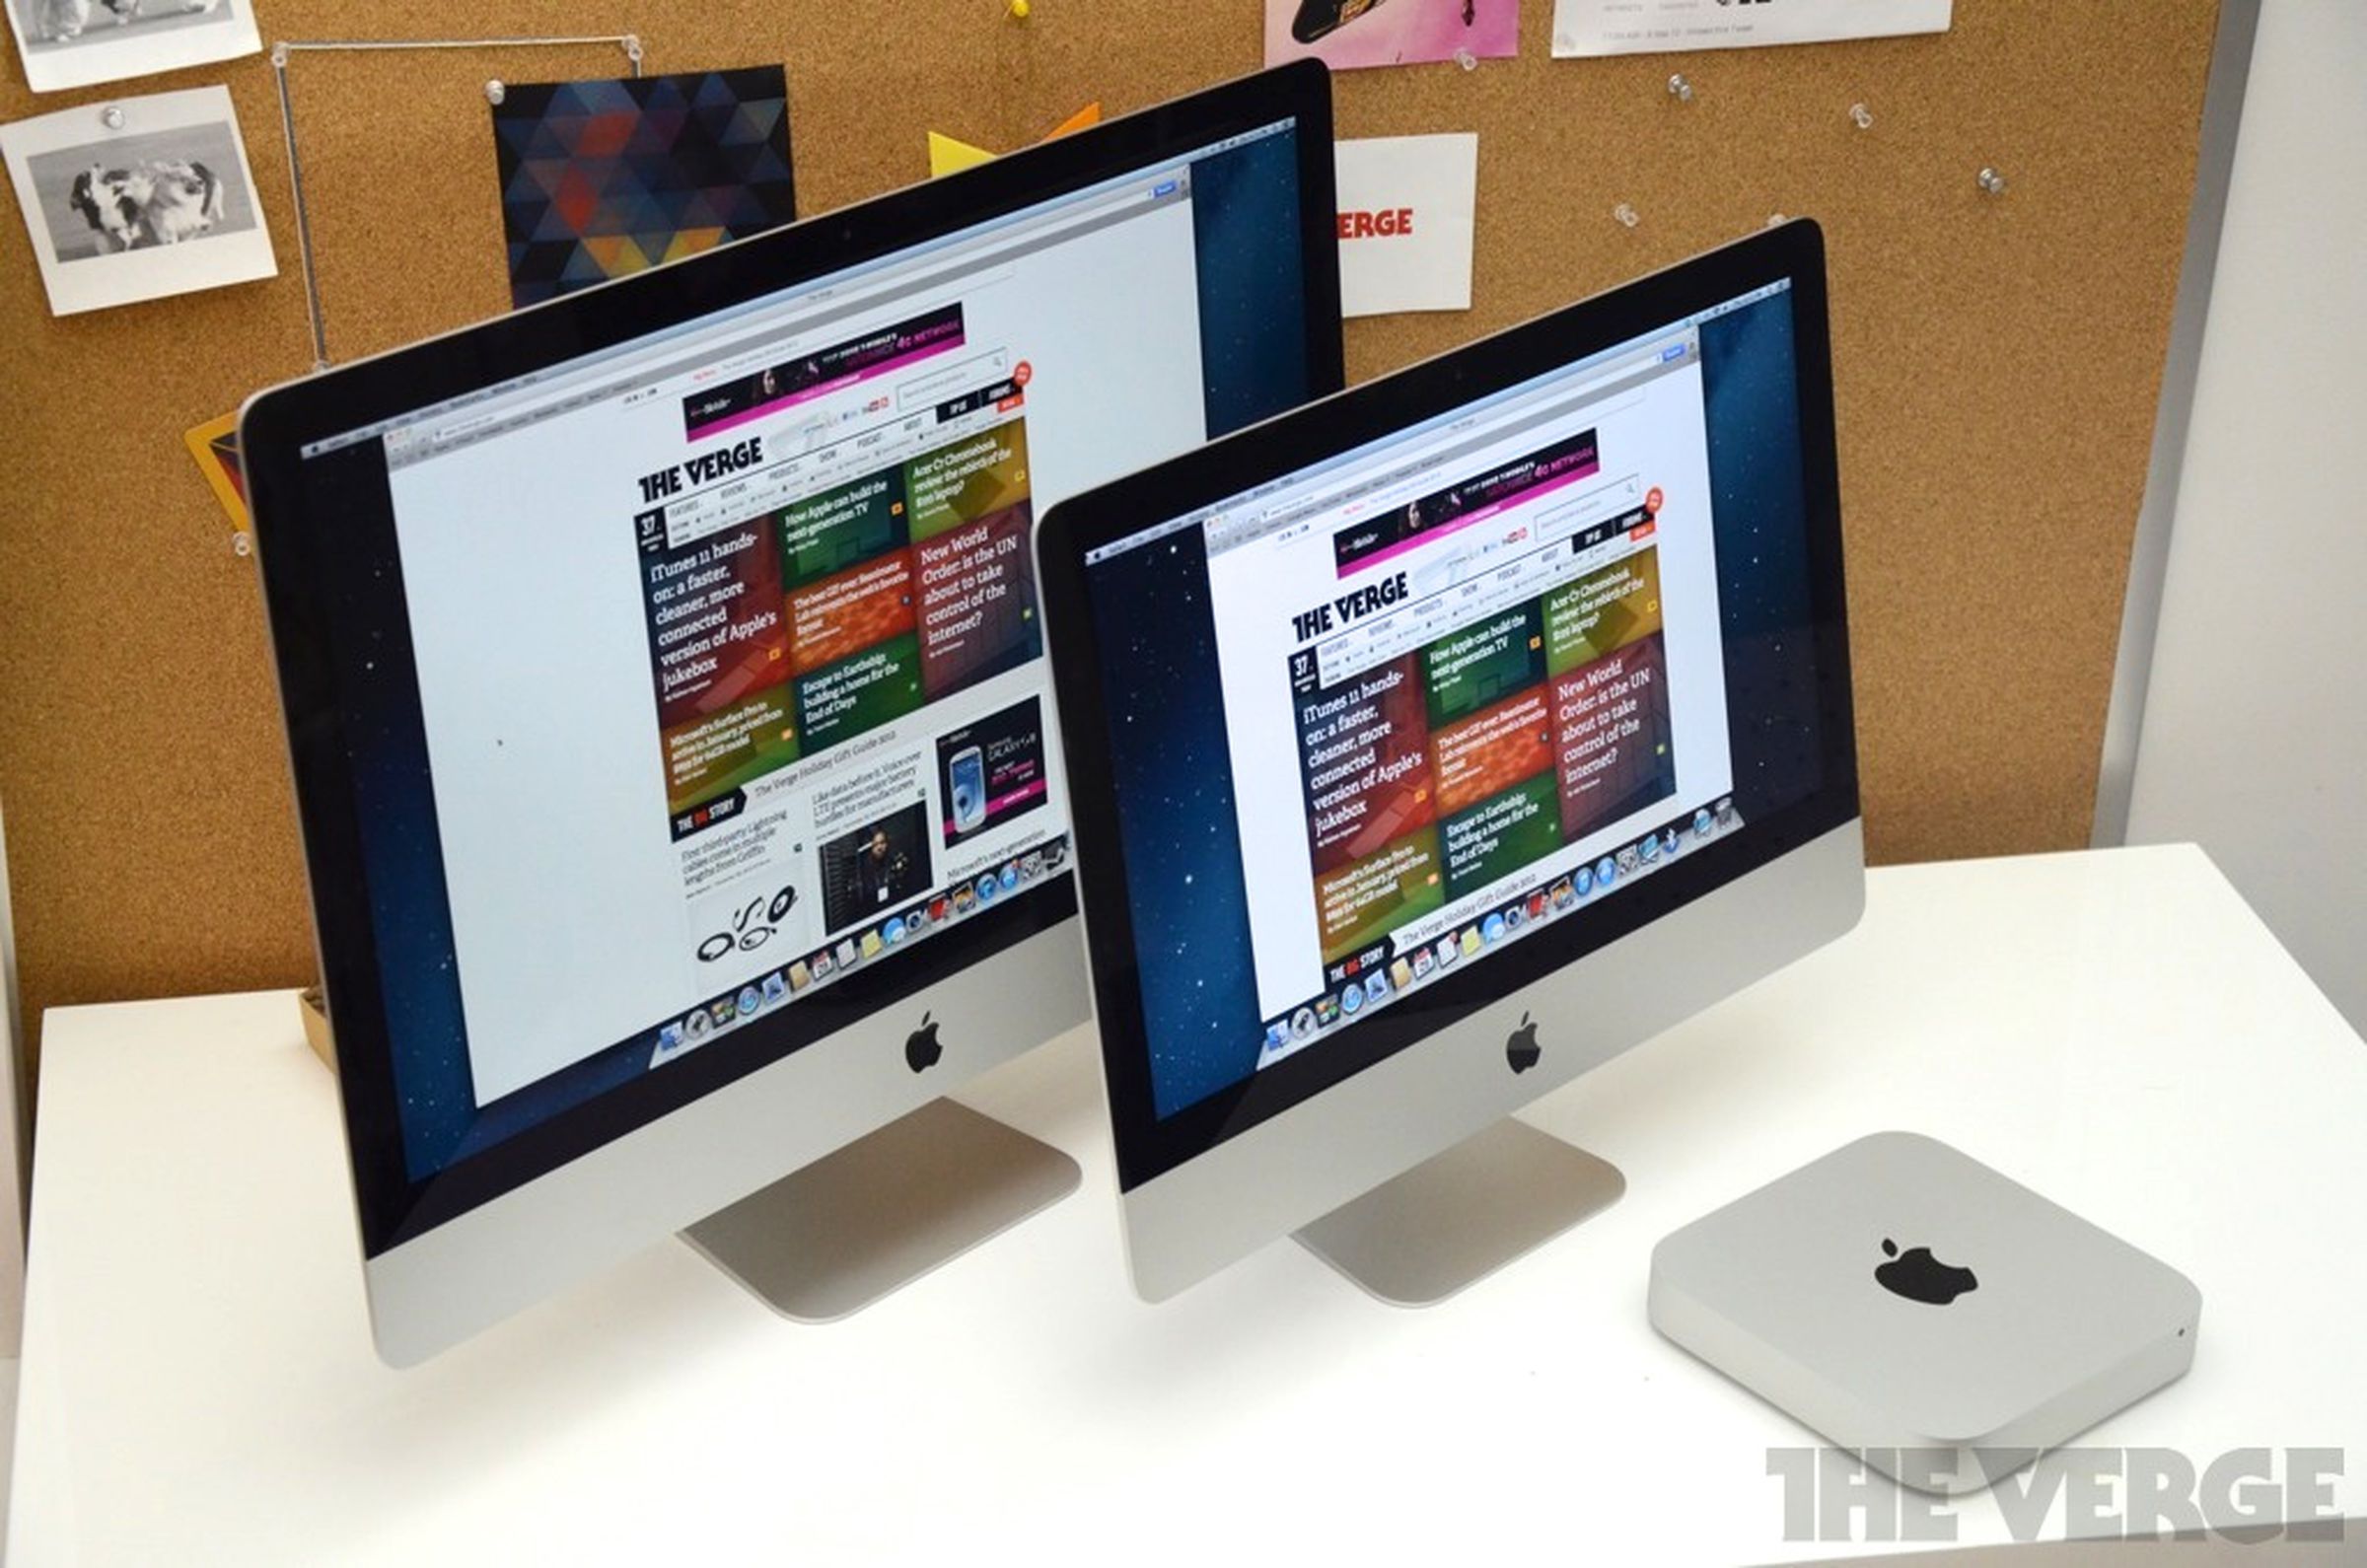 Apple Mac mini and iMac pictures (late 2012) 